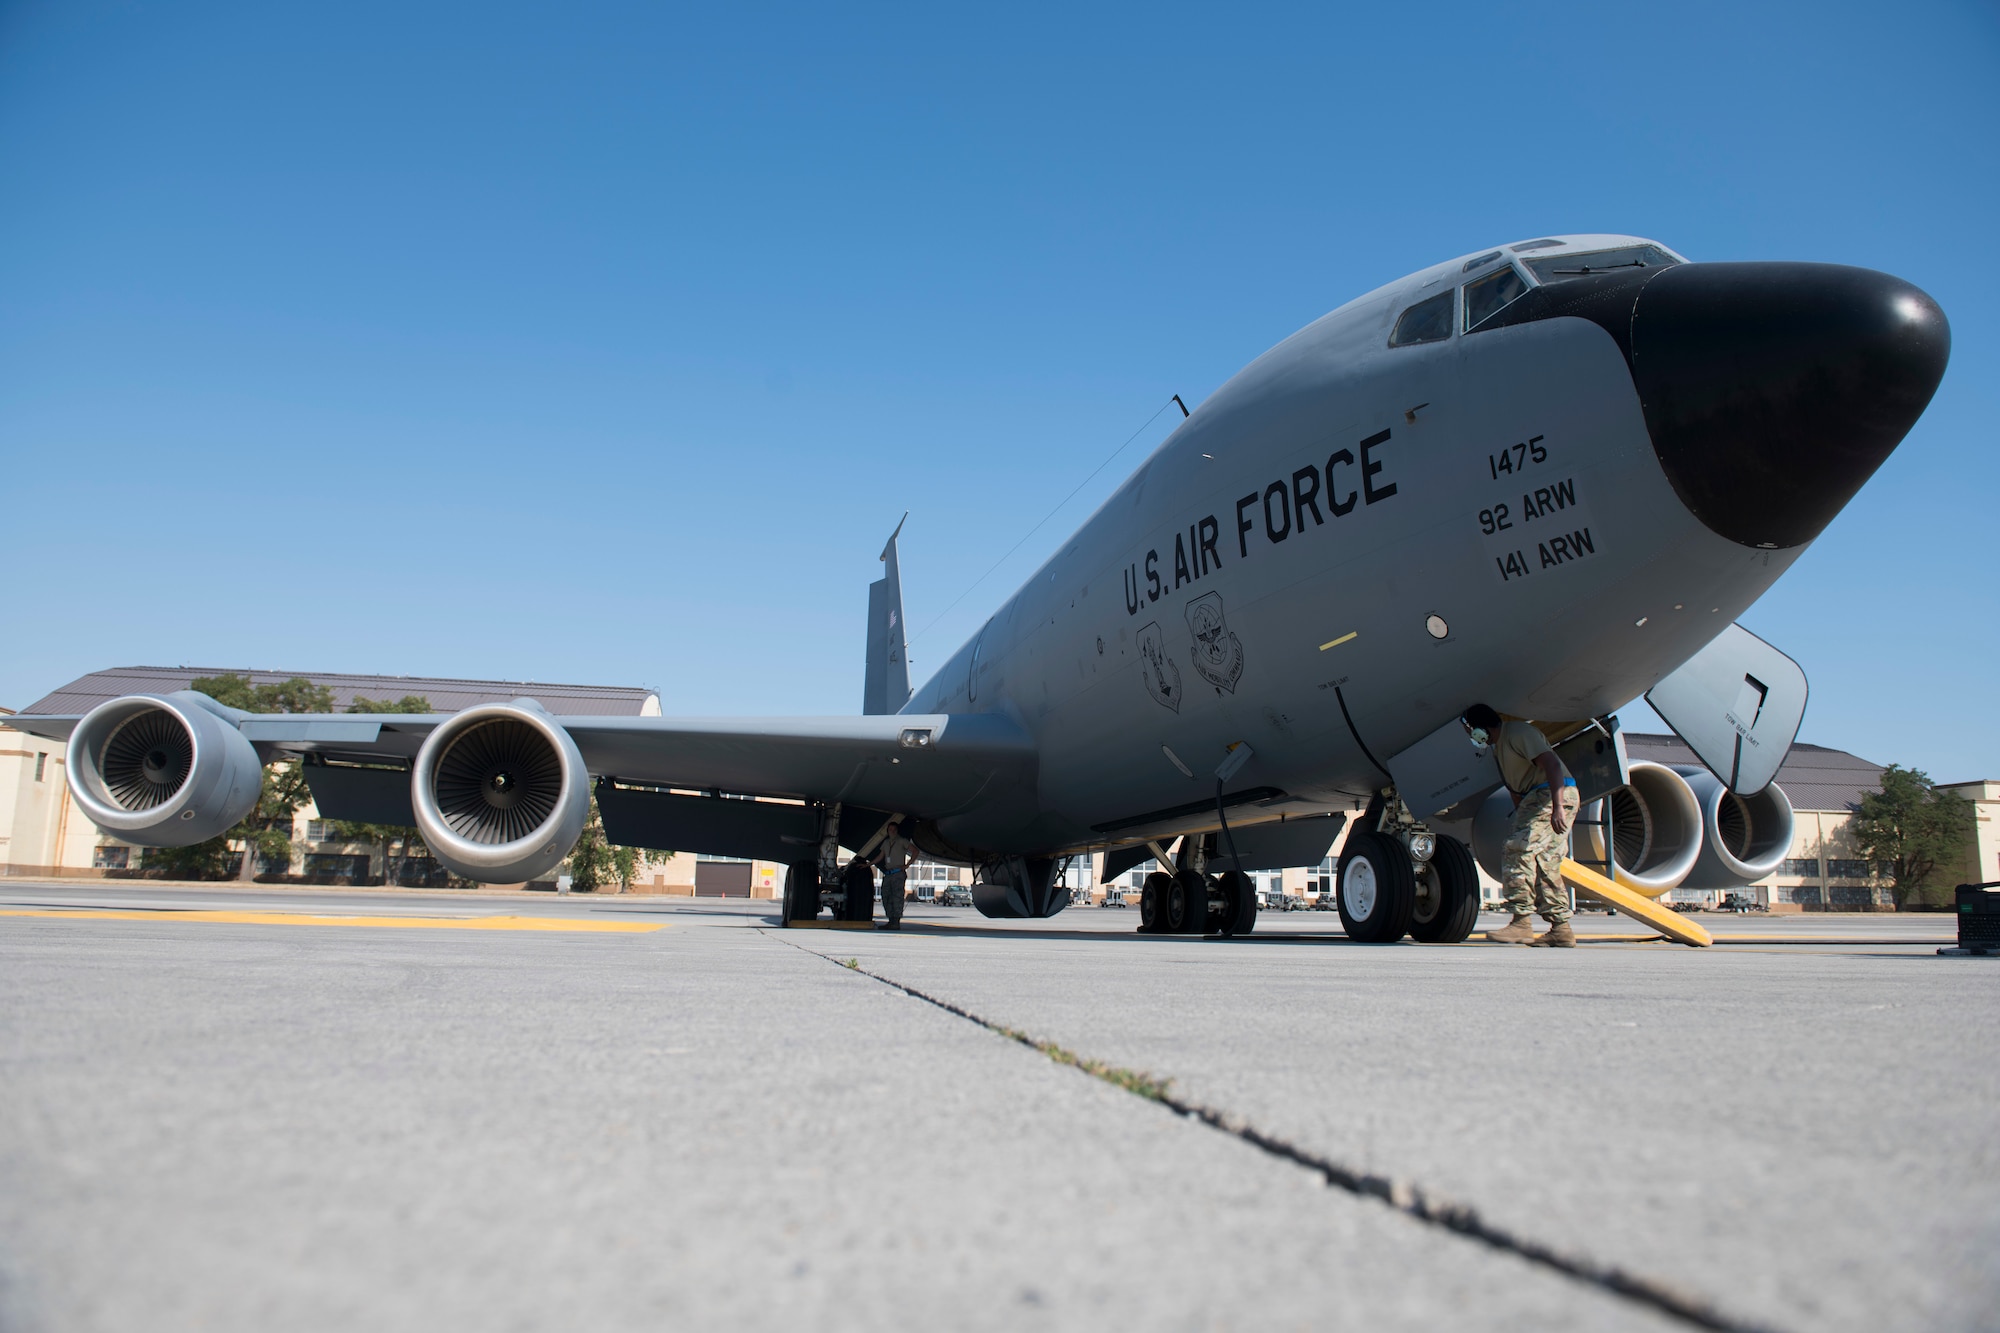 A KC-135 Stratotanker is prepared for take-off prior to an air refueling mission at Fairchild Air Force Base, Washington, July 29, 2020. After implementing Project Tesseract’s Theory of Constraints and Continuous Process of Improvement tools on every aspect of maintenance from a strategic scale, Team Fairchild was able to streamline maintenance inspections to produce 1,600 aircraft availability days for the 63 KC-135 Stratotanker fleet. (U.S. Air Force photo by Senior Airman Lawrence Sena)